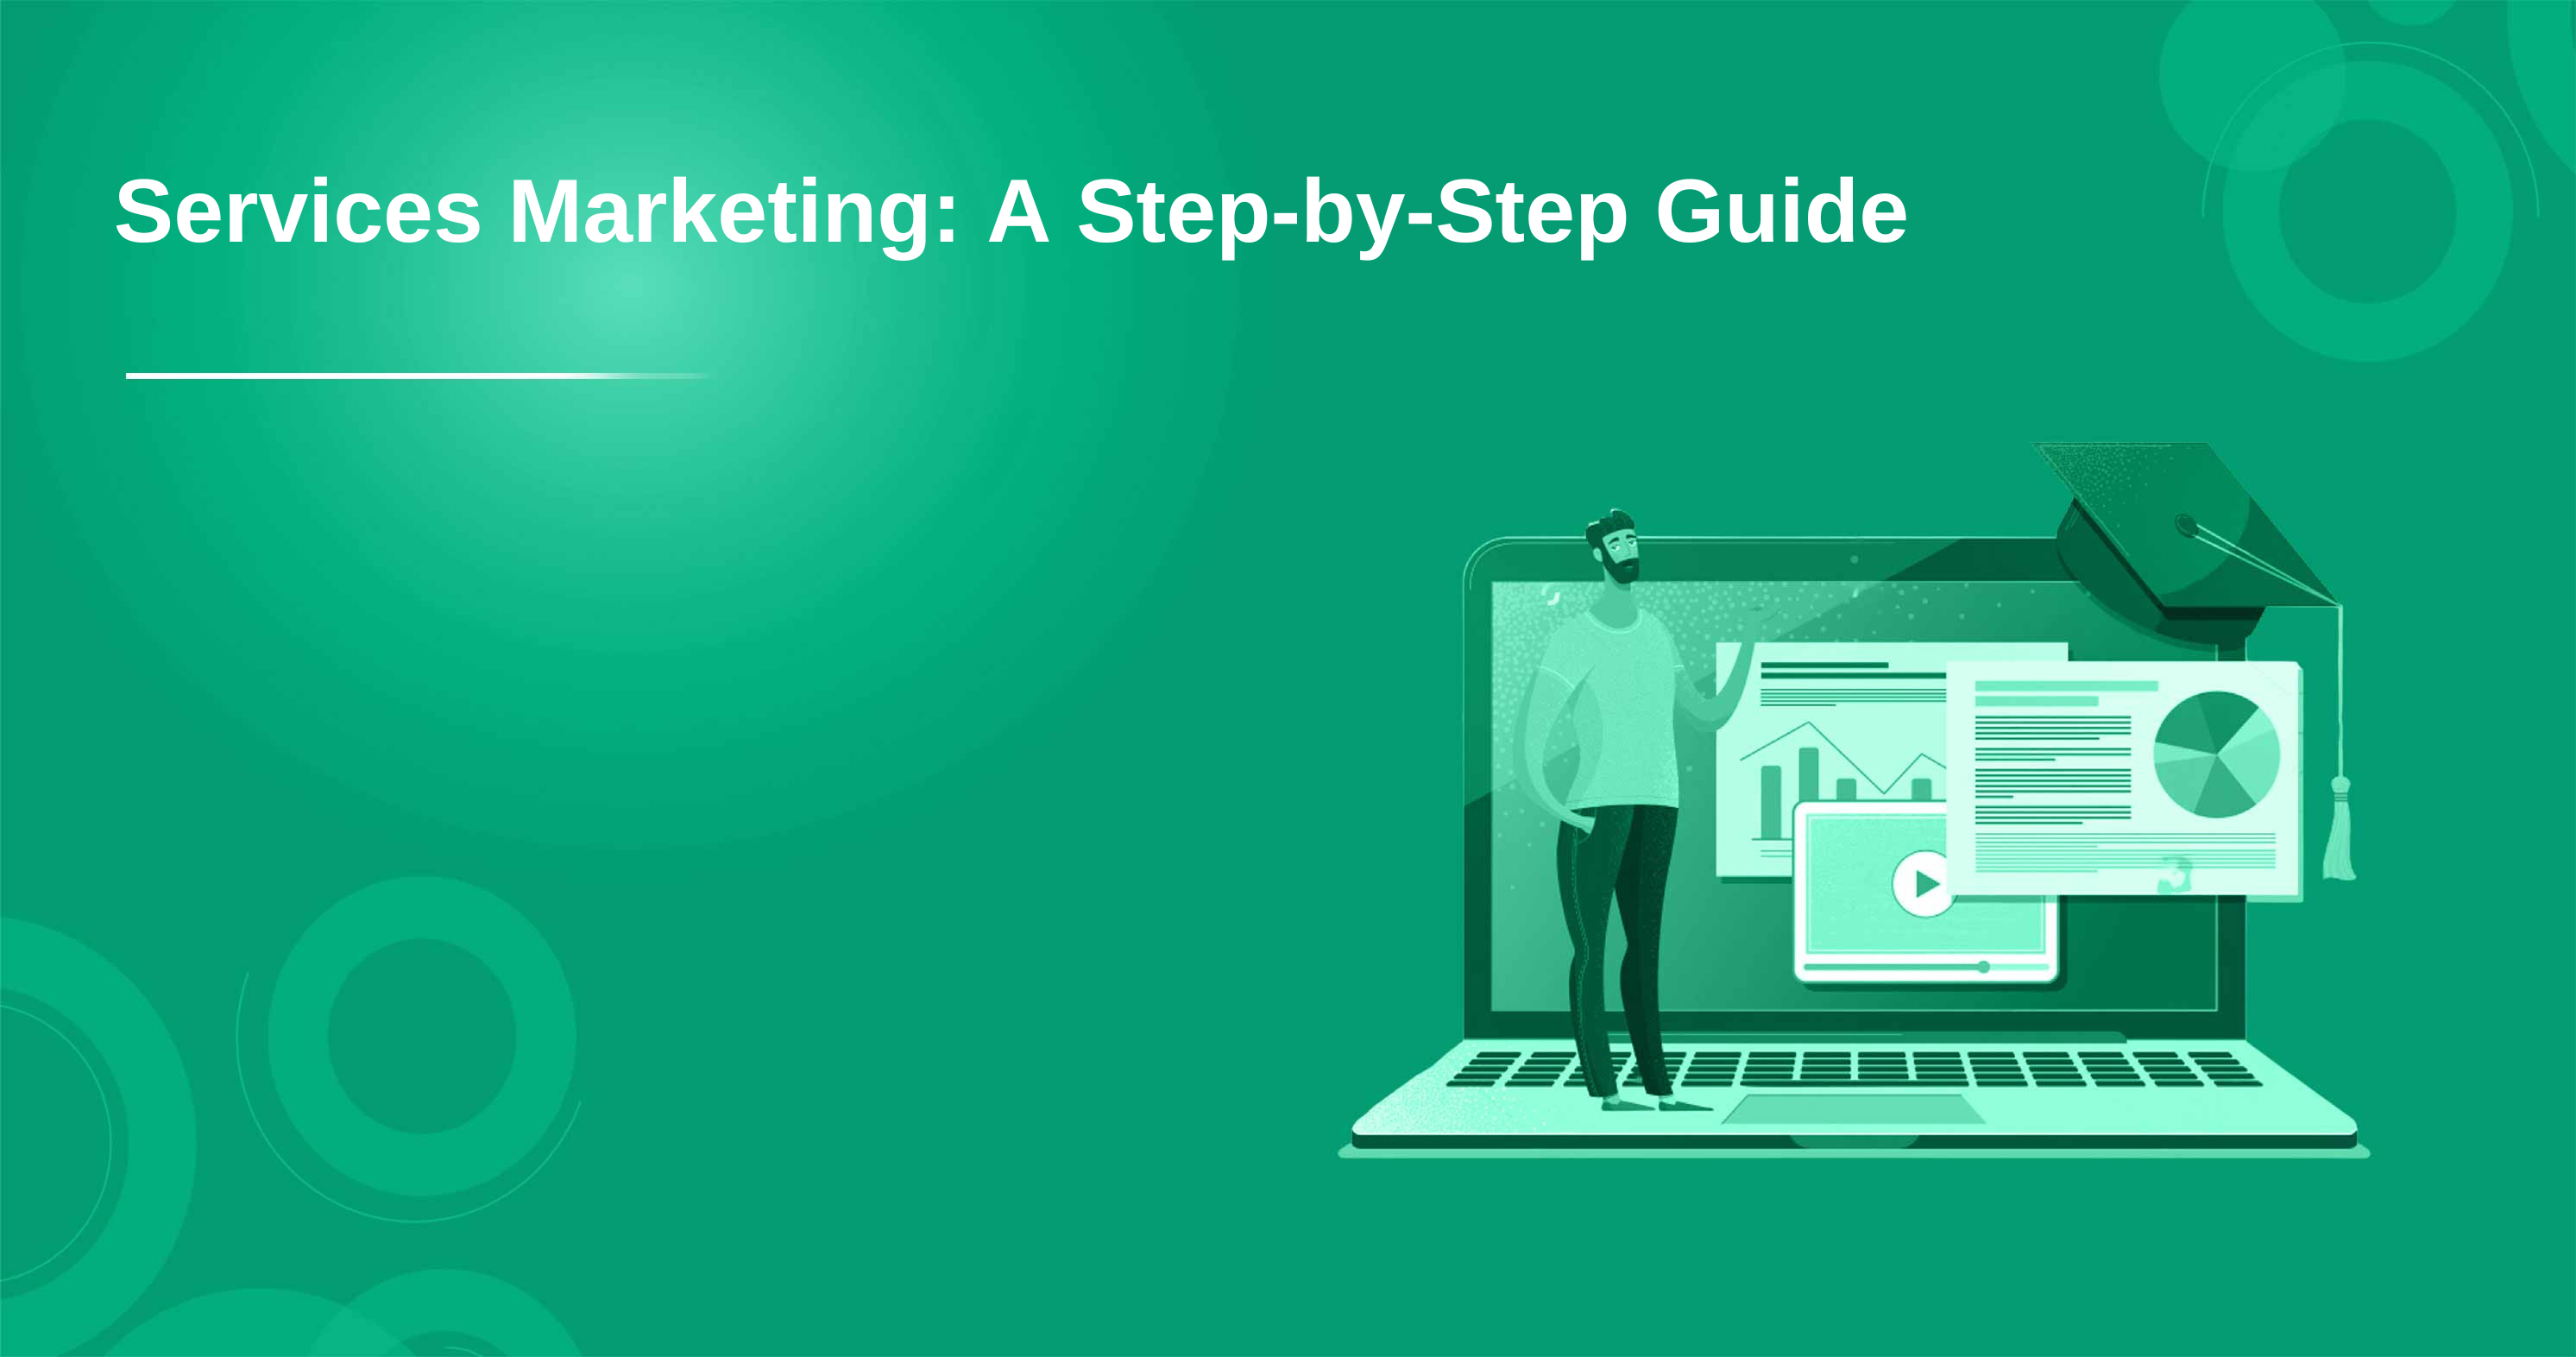 Services Marketing: A Step-by-Step Guide